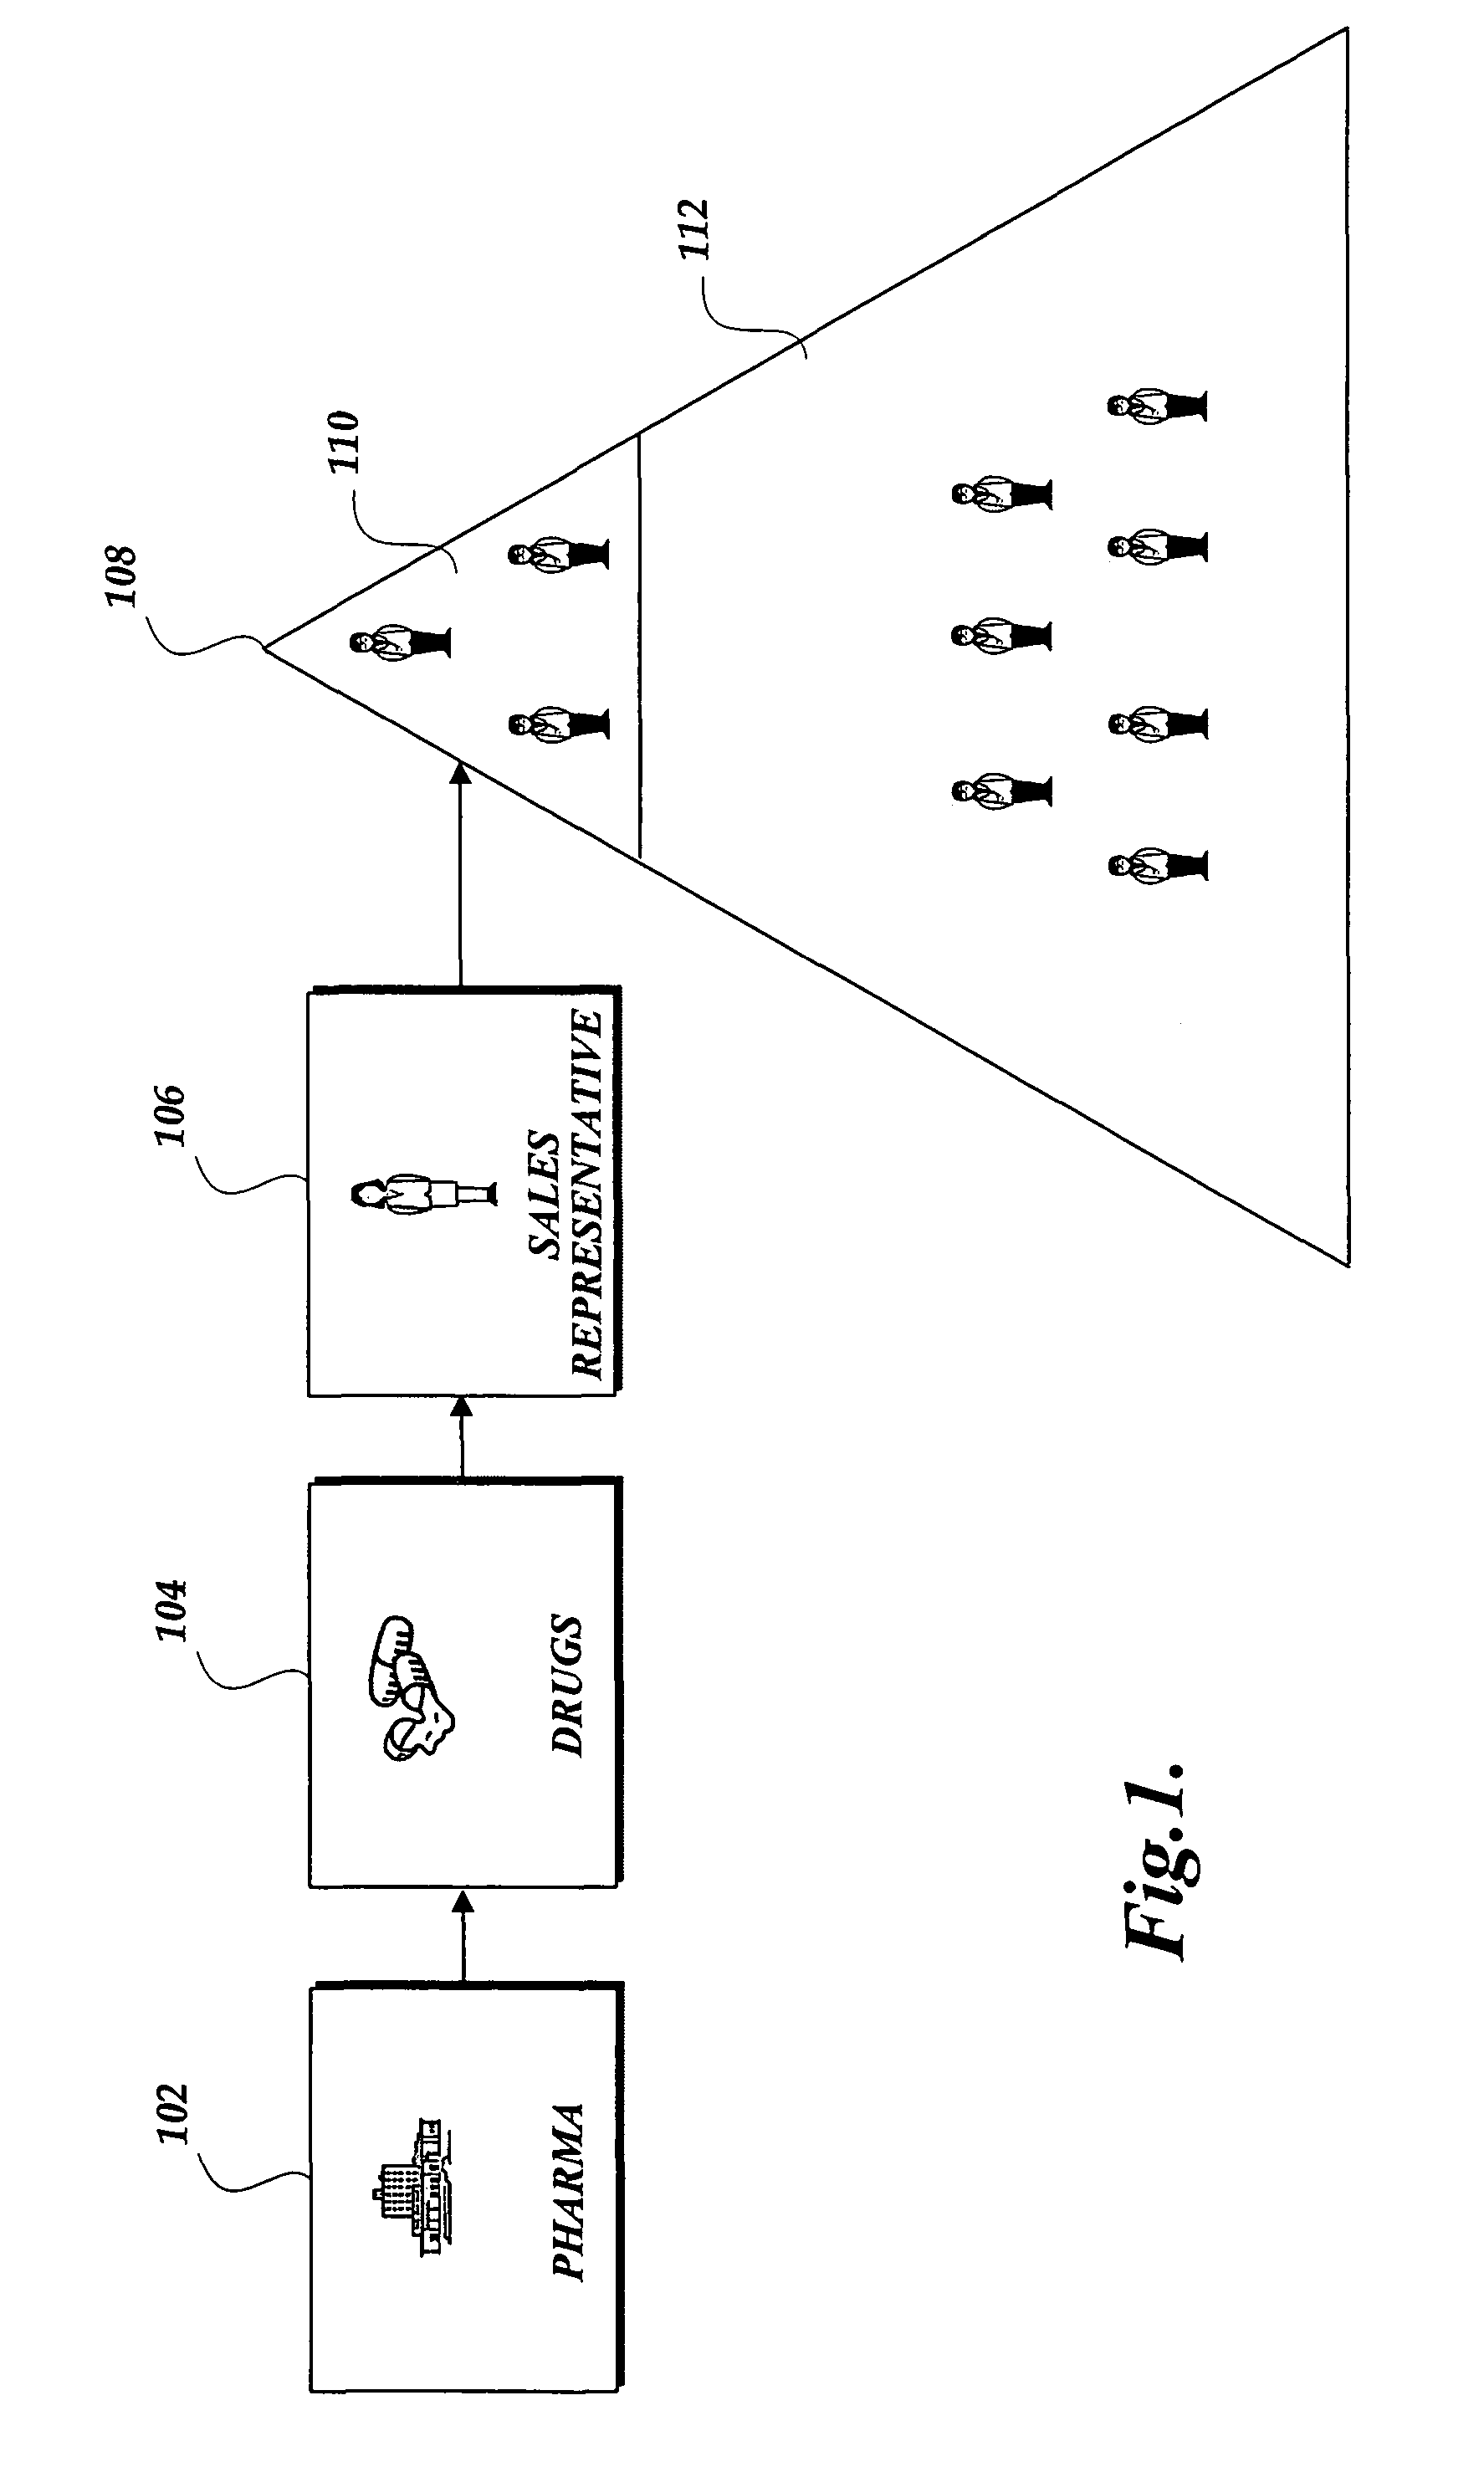 Authenticating prescriber identity to enable electronically ordering drug samples from a drug sample fulfillment platform